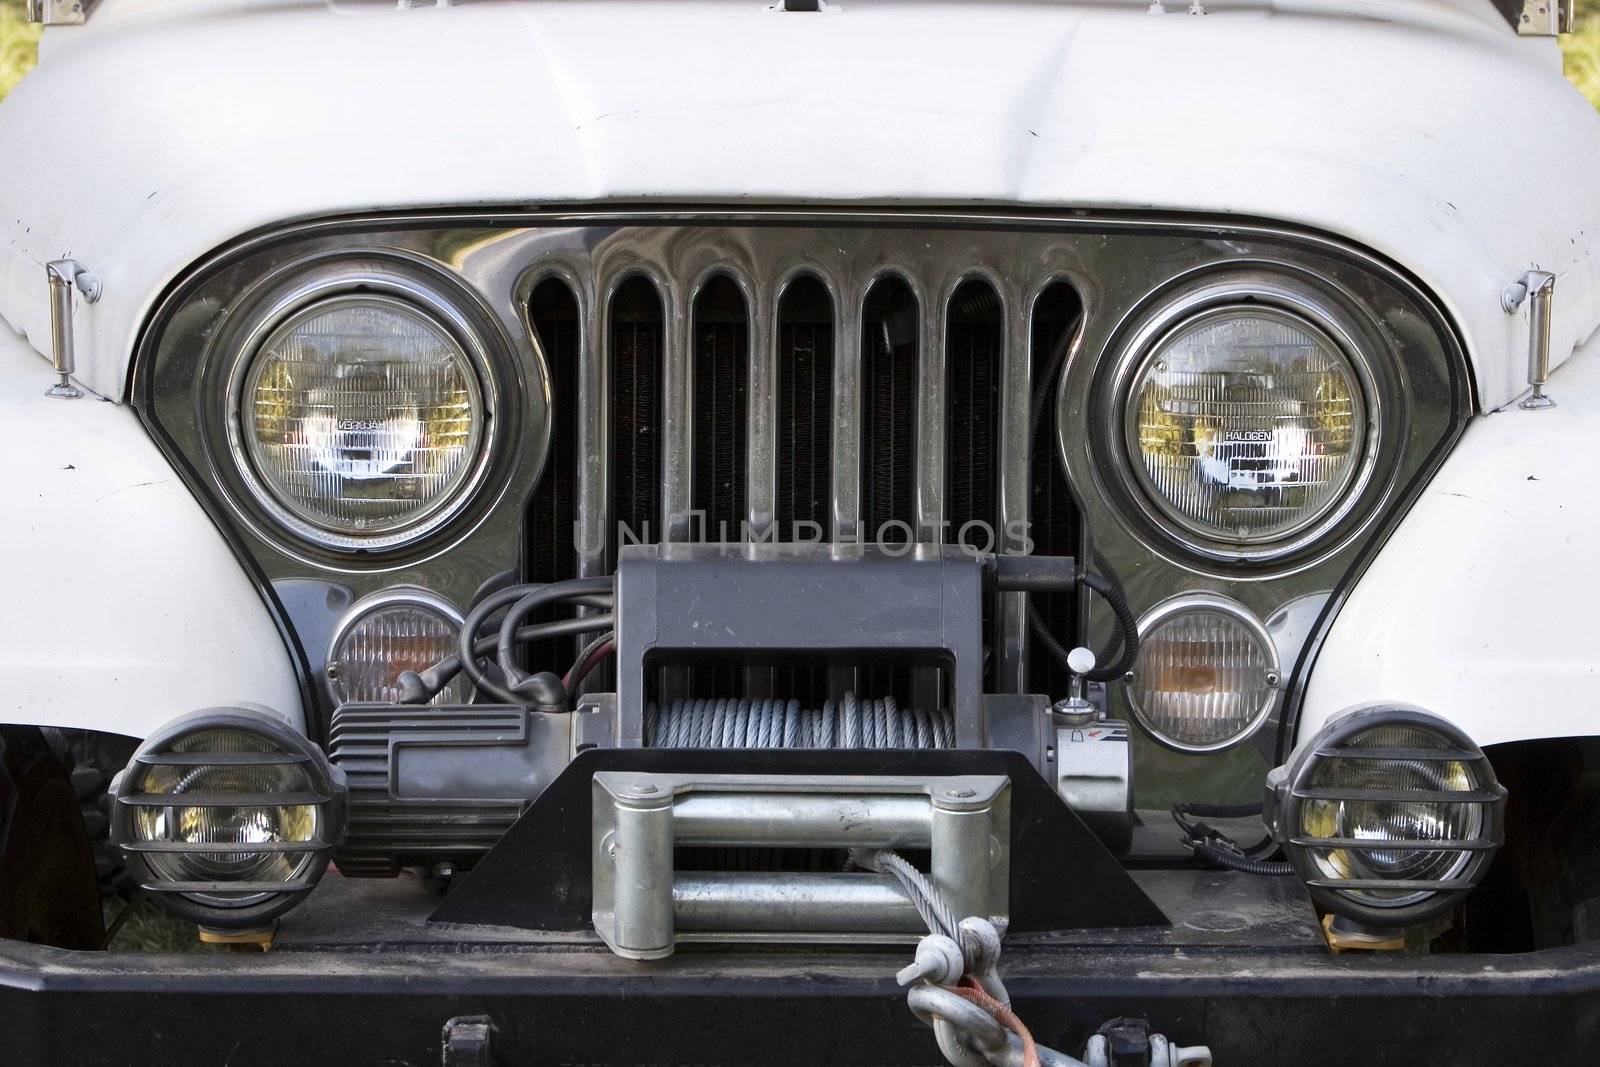 Front end, headlights and grille on a vintage four-wheel drive vehicle.